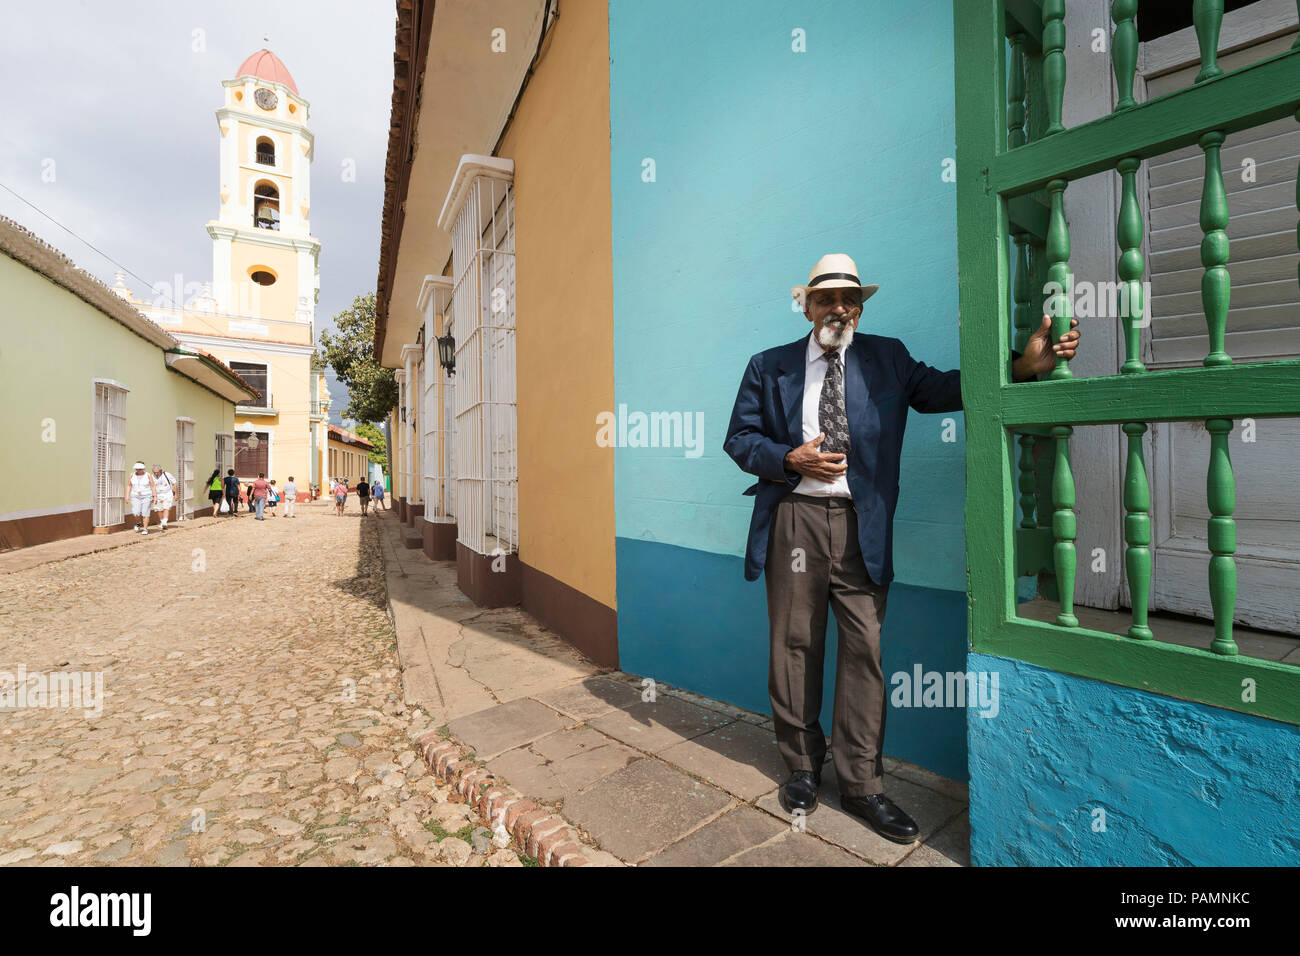 Local man in front of the Convento de San Francisco in the UNESCO World Heritage town of Trinidad, Cuba. Stock Photo